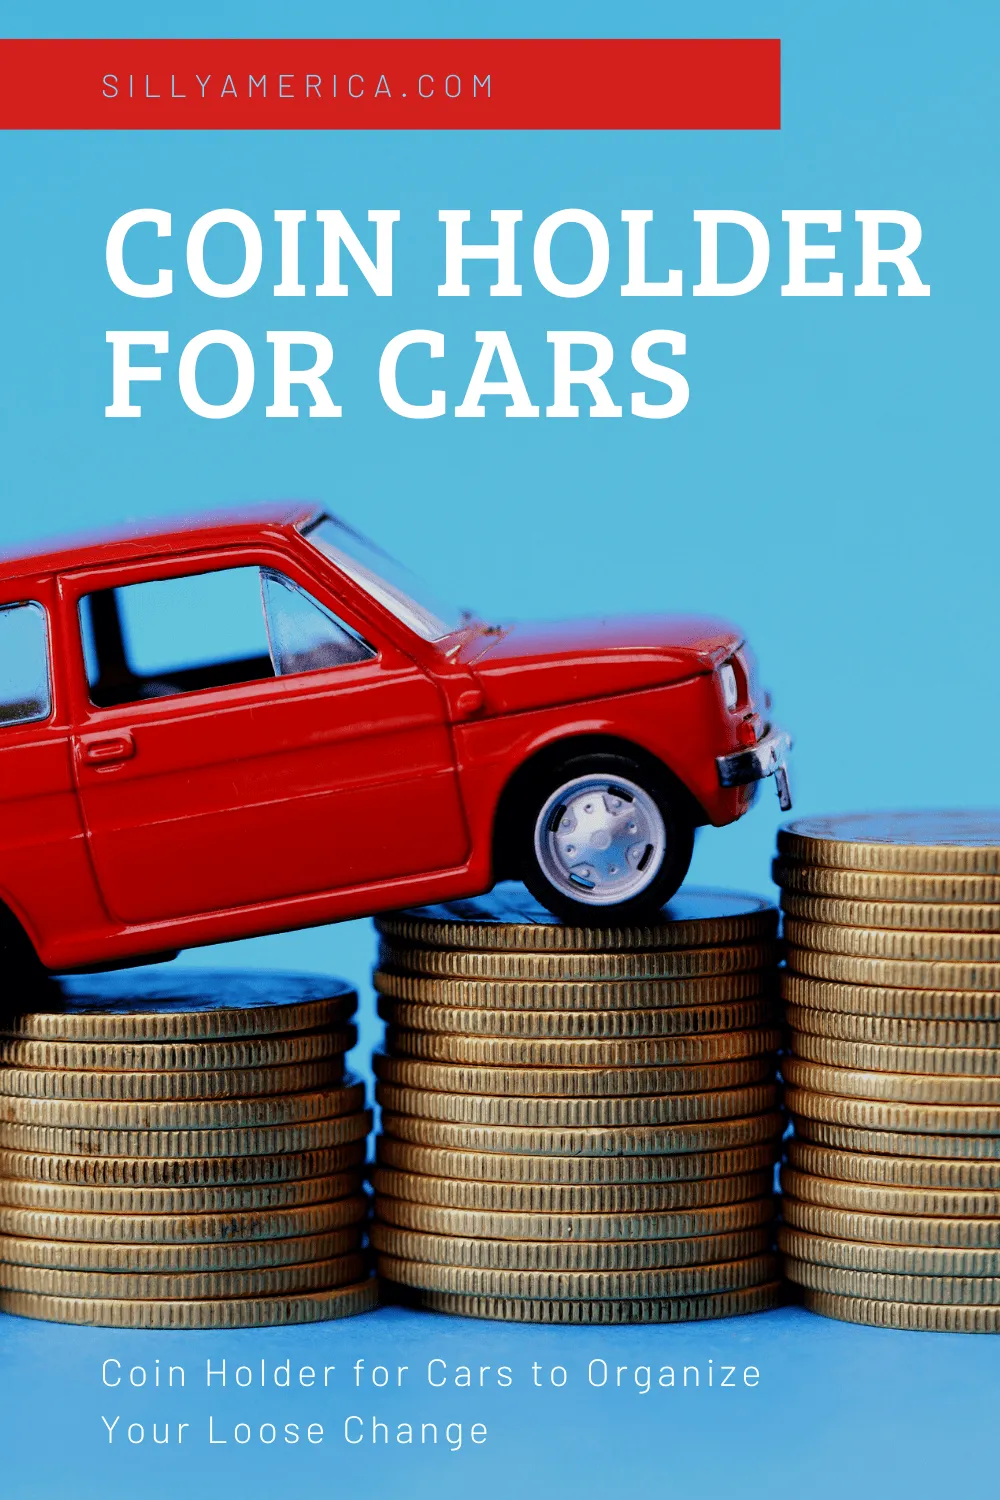 Having a coin holder for cars in your car will assure you that much-needed coins are always an arm-length away. Have change on had for tolls and parking and organize your loose change on your dashboard, glove box, or cup holder. #RoadTripEssentials #LongRoadTripEssentials #RoadTripEssentialsList #RoadTripEssentialsHacks #RoadTripEssentialsForCars #RoadTripEssentialsChecklist